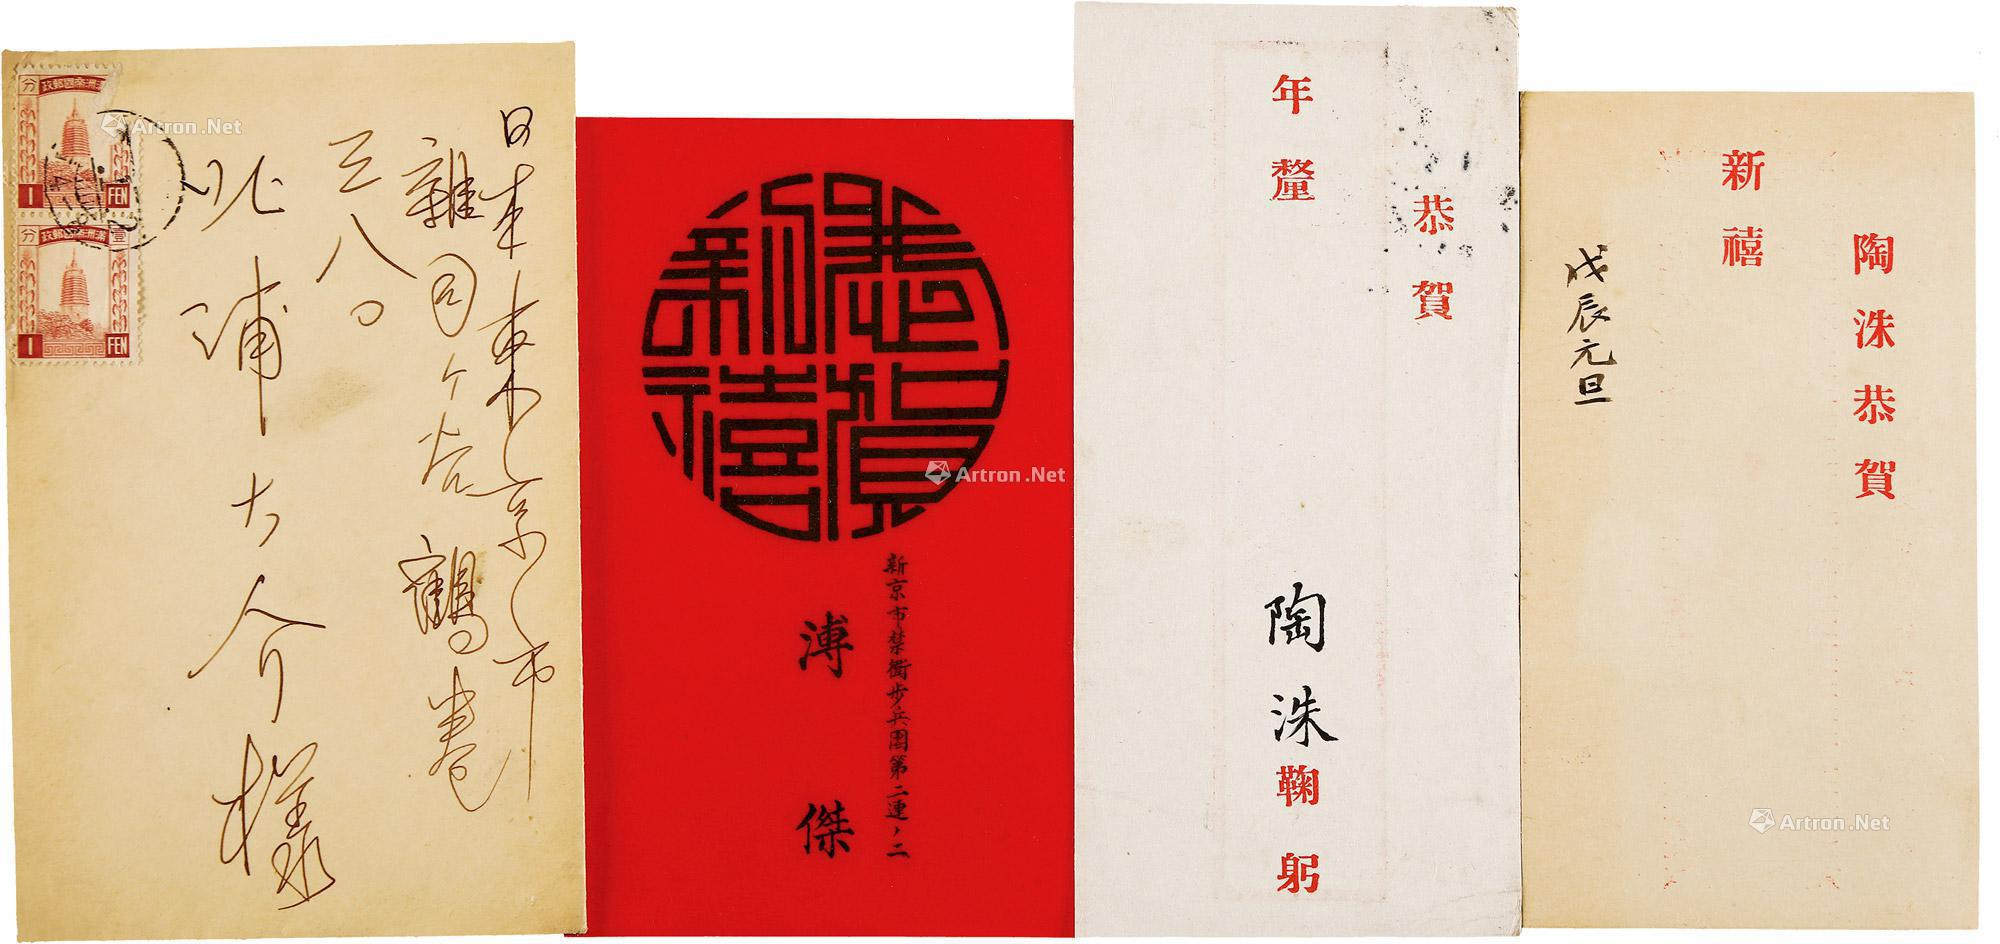 Group of three pages Greeting Card of Fu Jie and signature greeting card invitation of Tao Zhu， with original covers